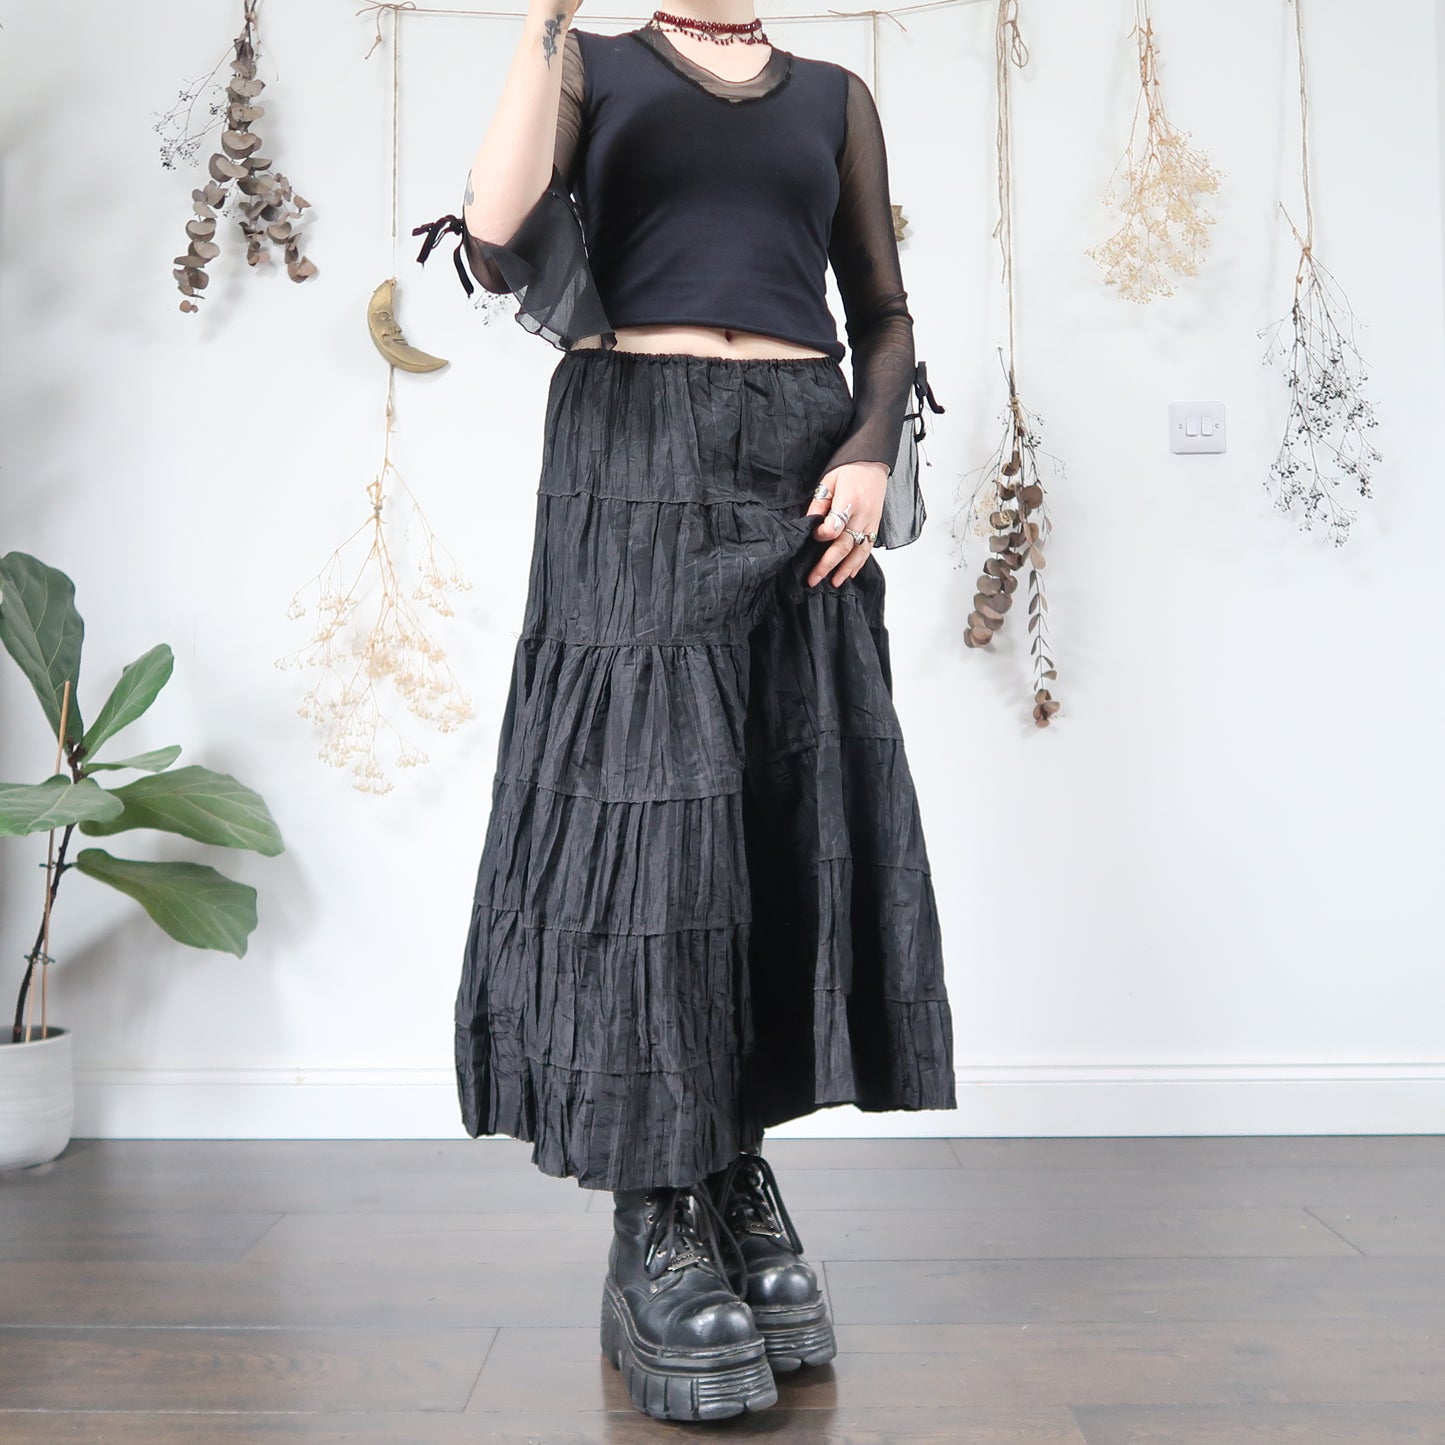 Black tiered skirt - size S/M